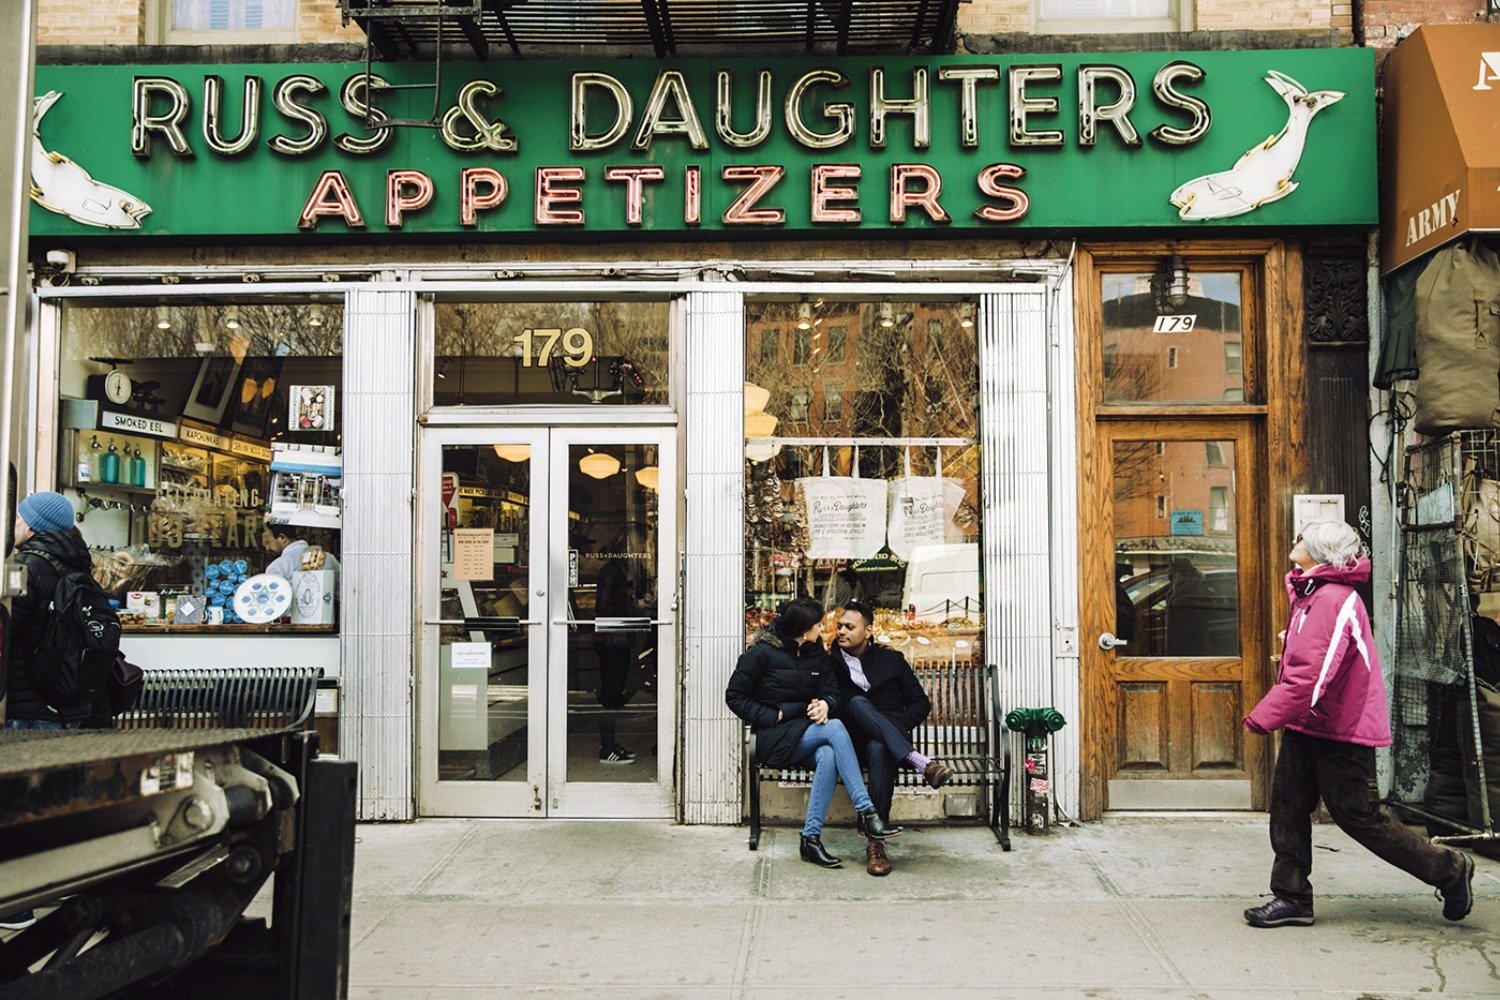 Russ and Daughters appetizers